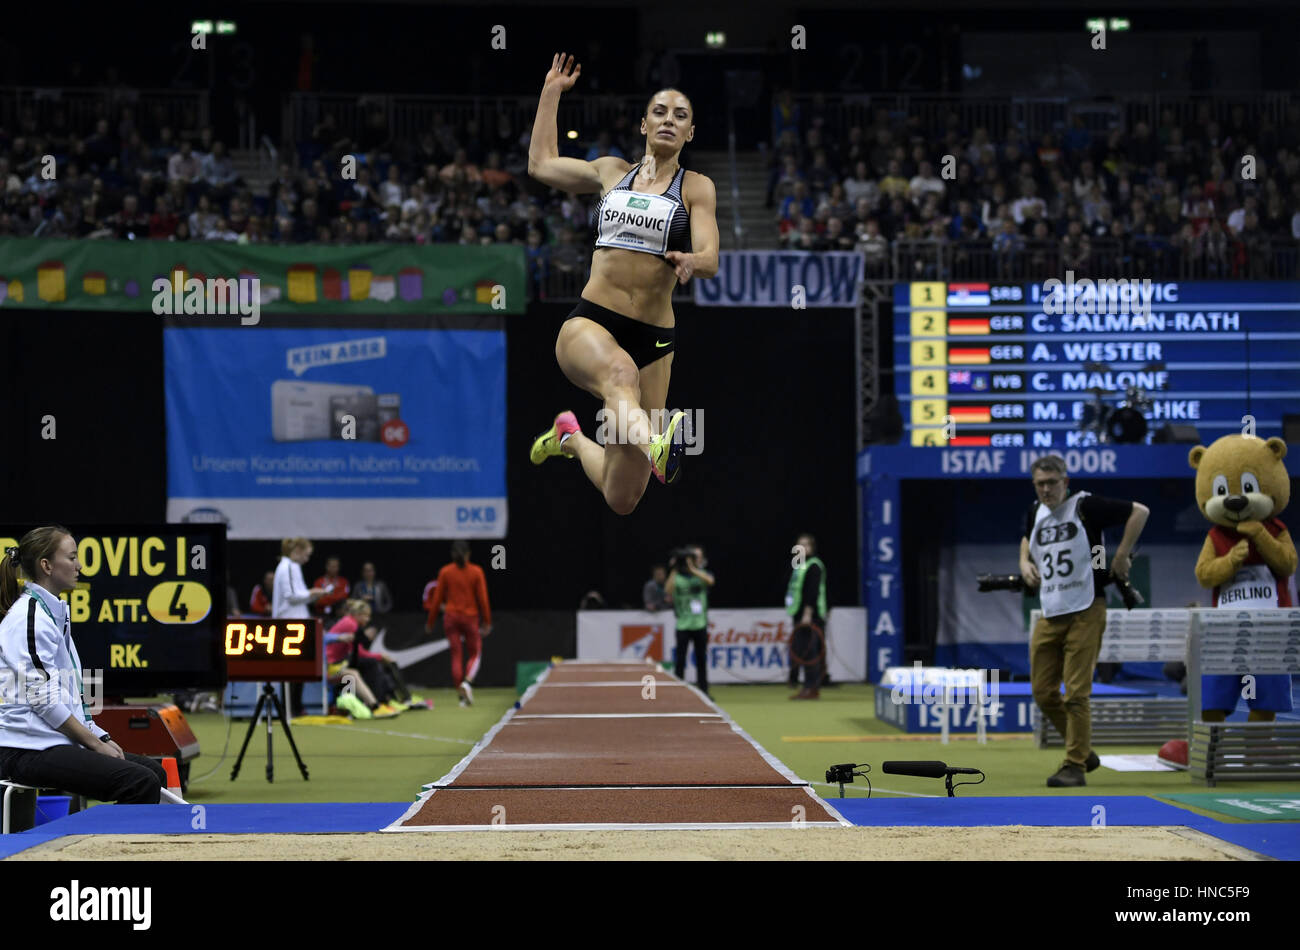 Berlin, Germany. 10th February 2017. ISTAF Indoor 2017, Mercedes-Benz Arena in Berlin, Germany. 10th February, 2017.  Women Long Jump winner Ivana Spanovic (Serbia) jumping a distance of 6.87 meters. Credit: Paul Velasco/Alamy Live News Stock Photo